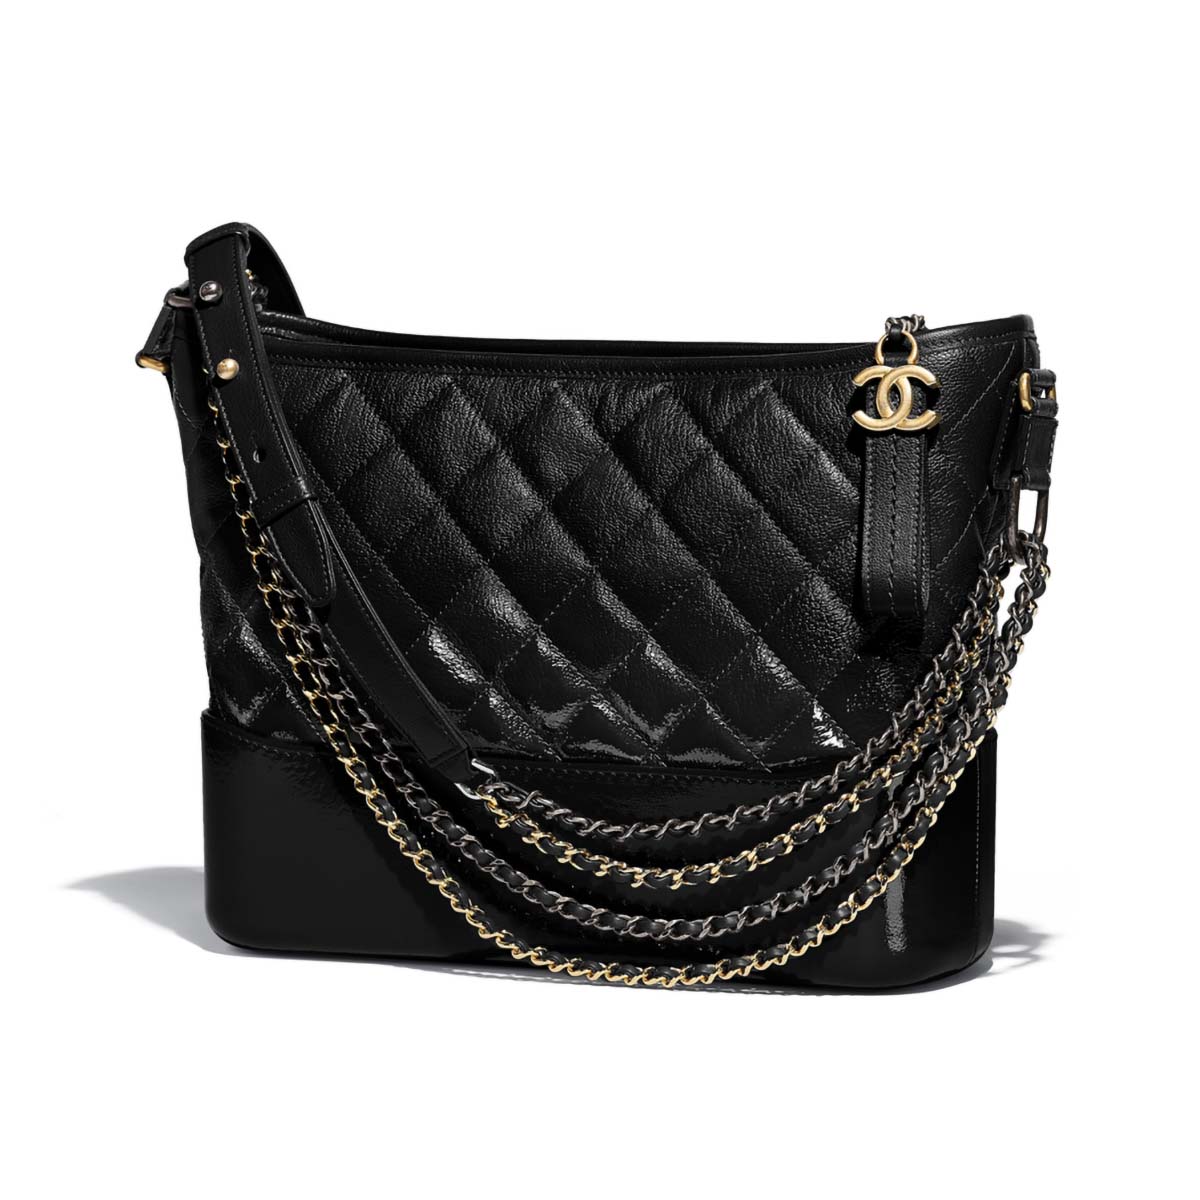 Chanel Gabrielle So Black small hobo bag in black chevron quilted